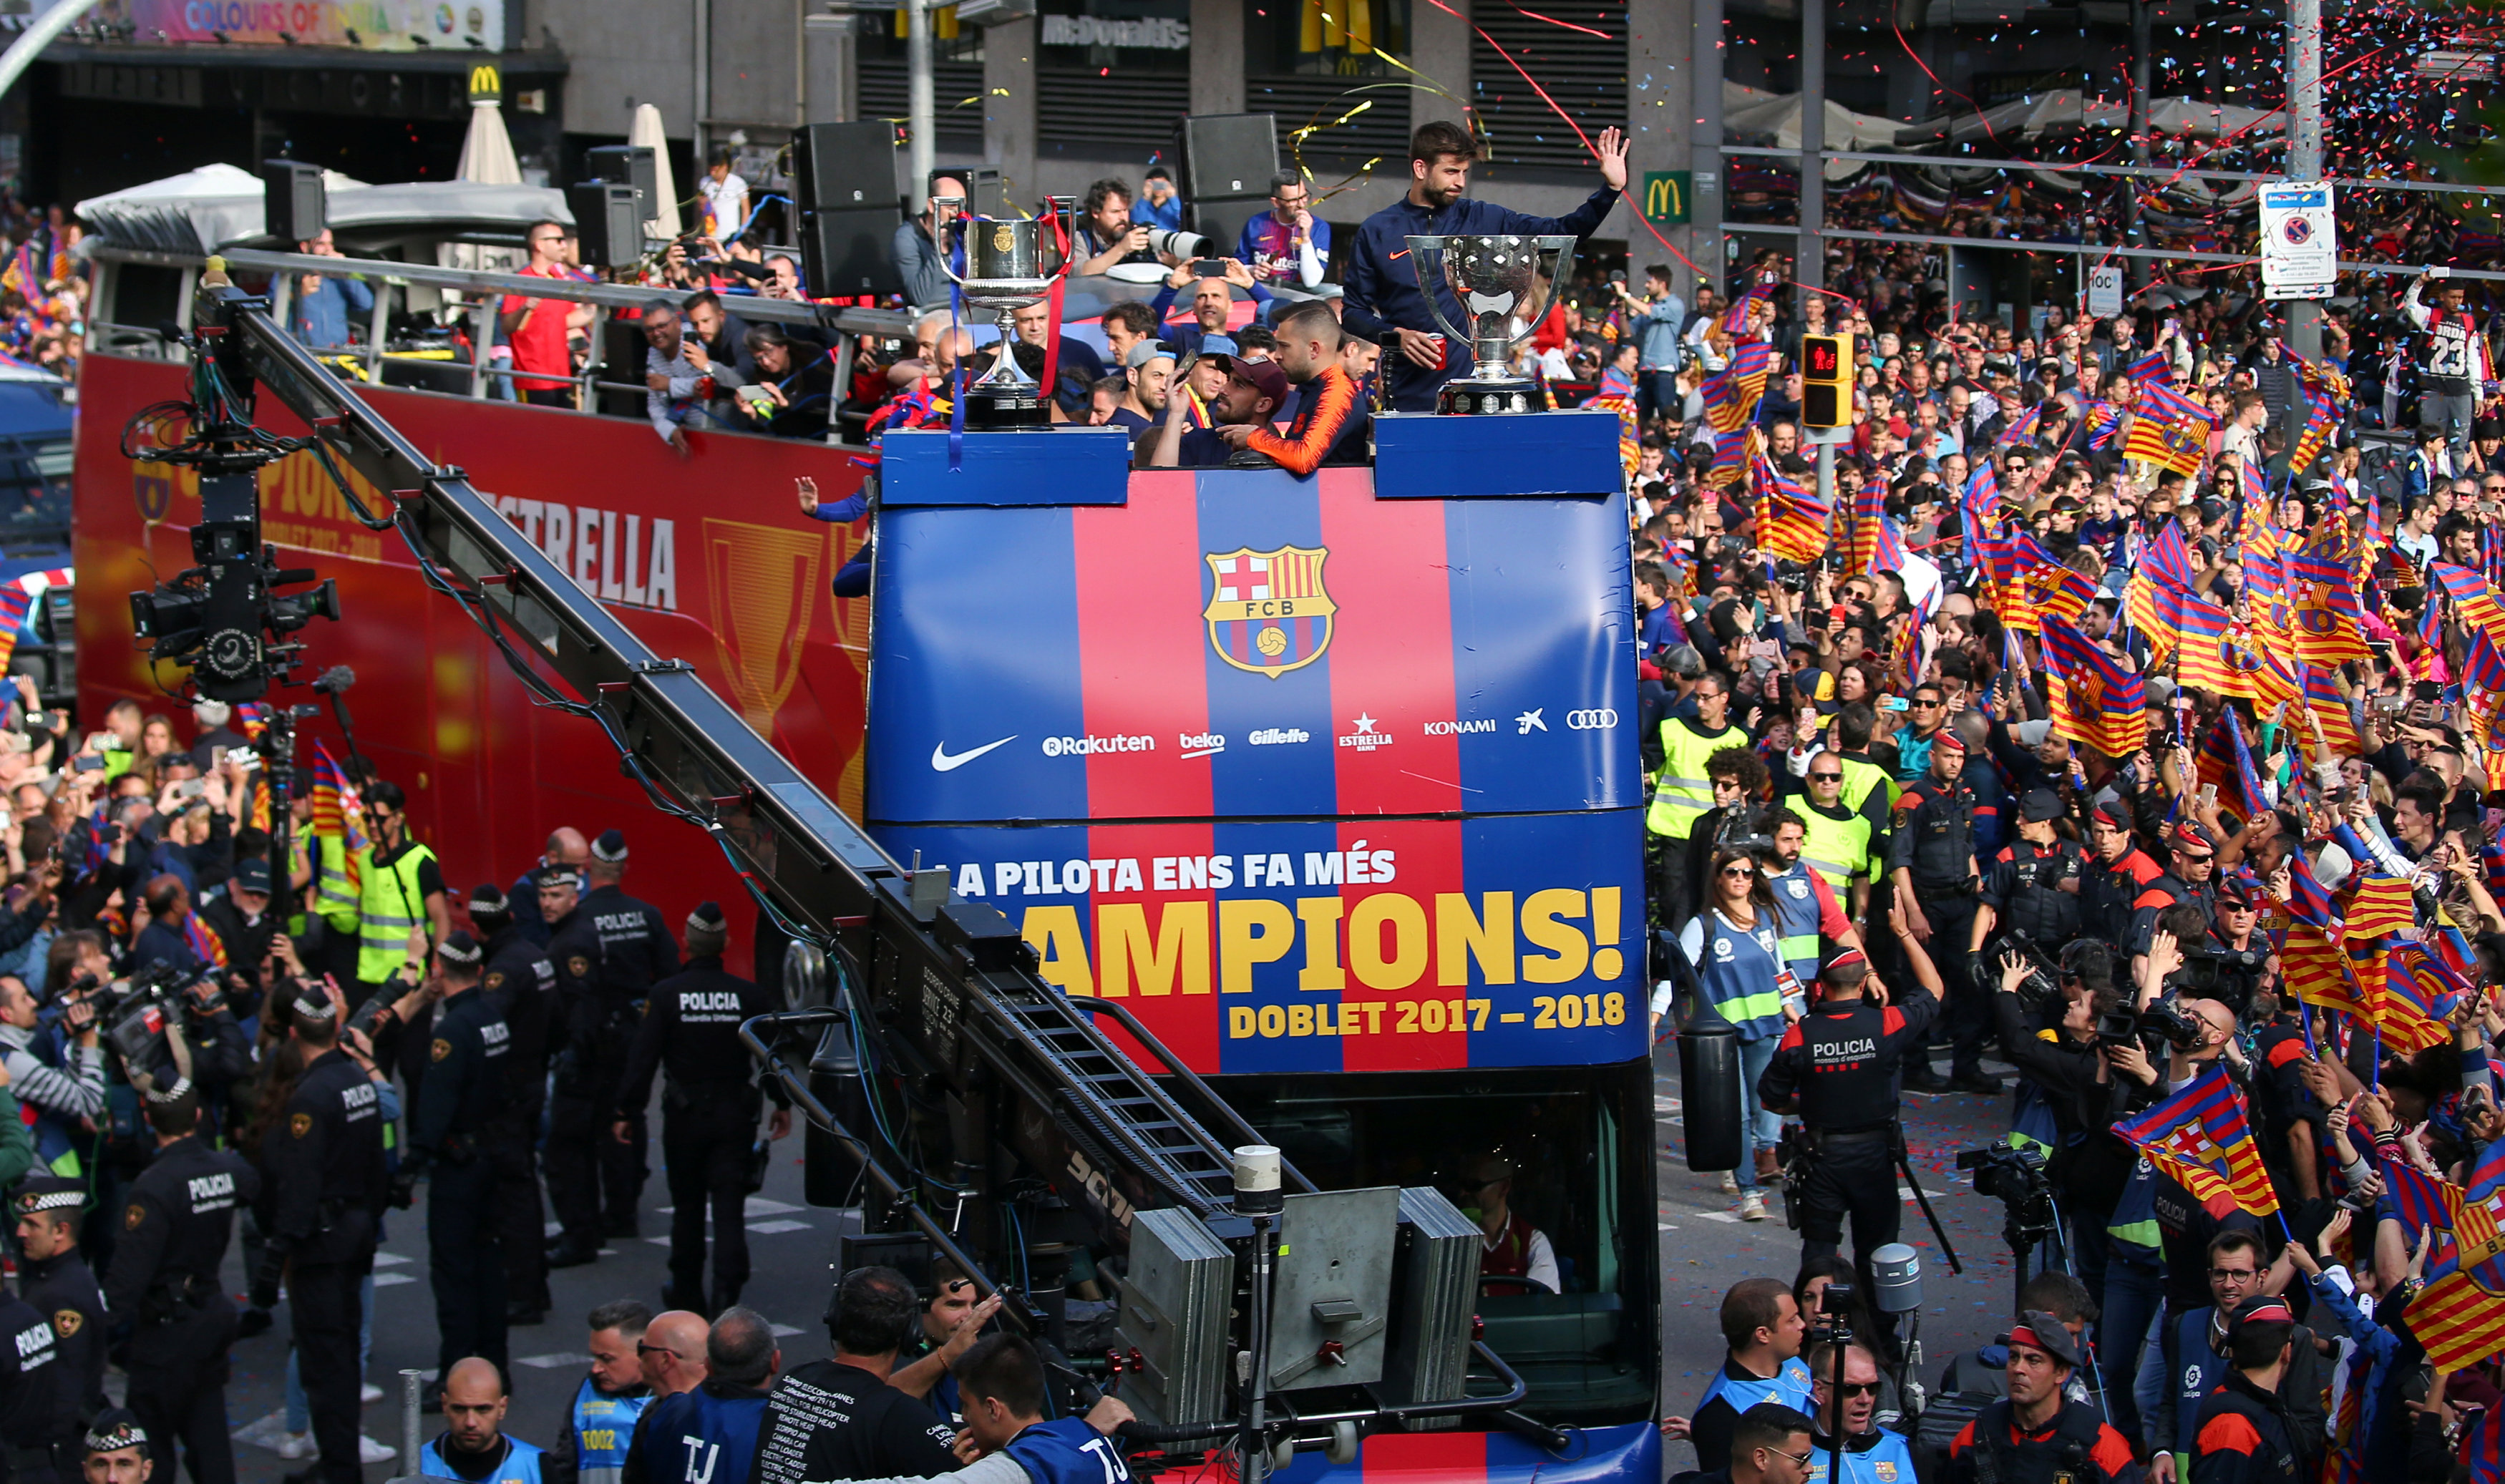 All FCBarcelona players parading in Barcelona streets (by Reuters/Albert Gea)